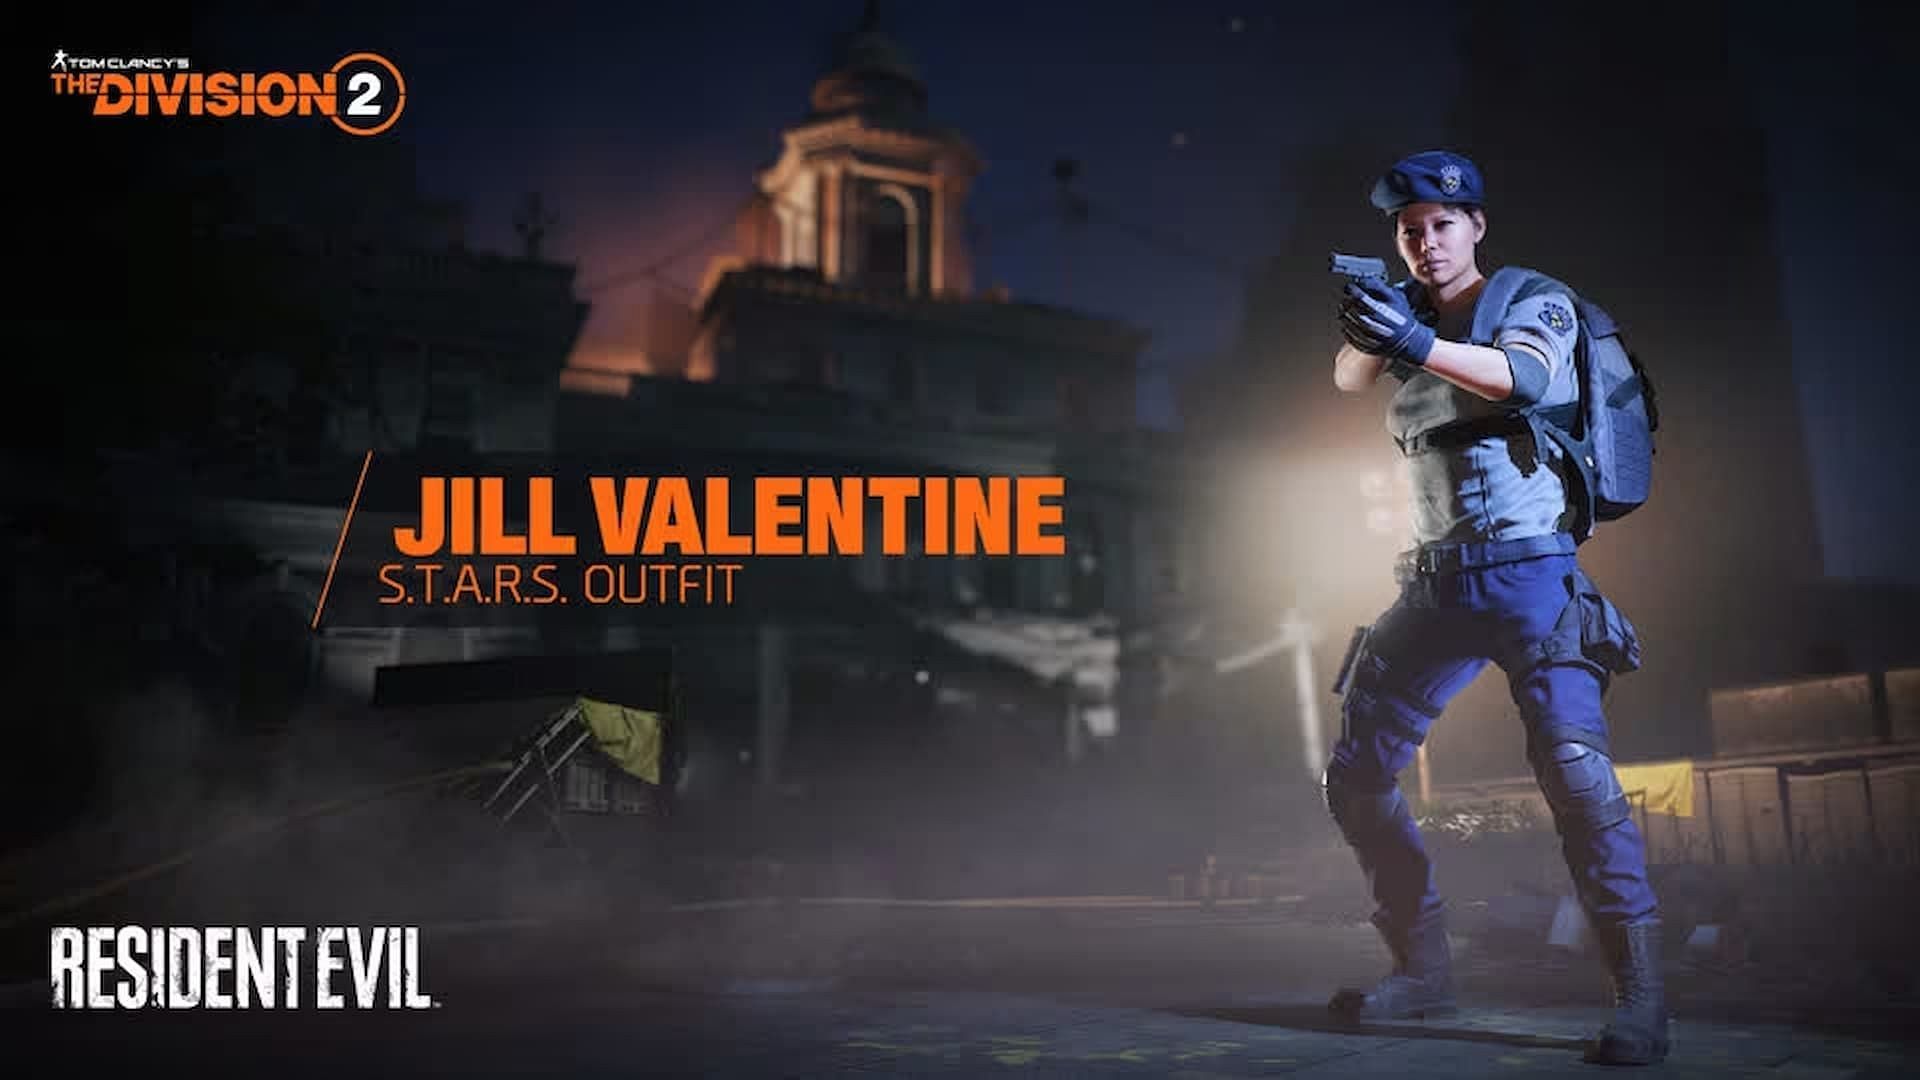 The Jill Valentine outfit in The Division 2 (Image via Ubisoft)